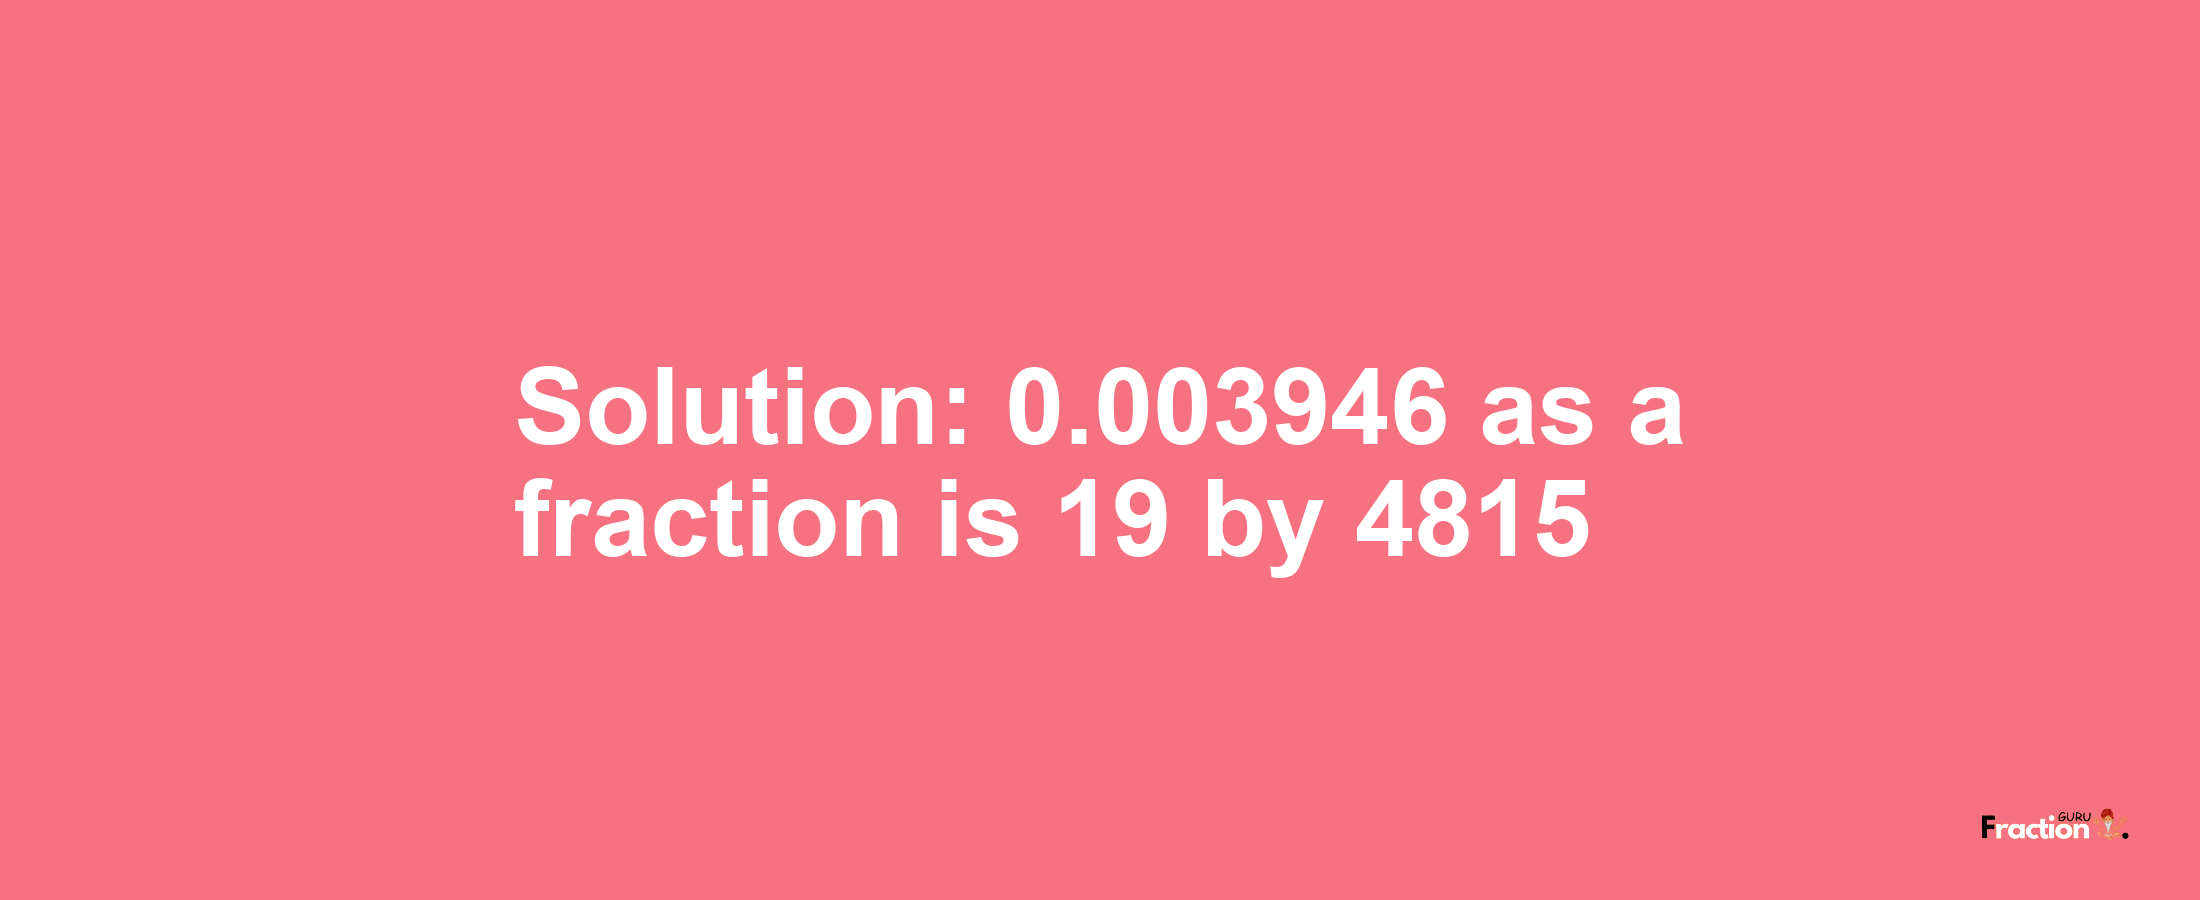 Solution:0.003946 as a fraction is 19/4815